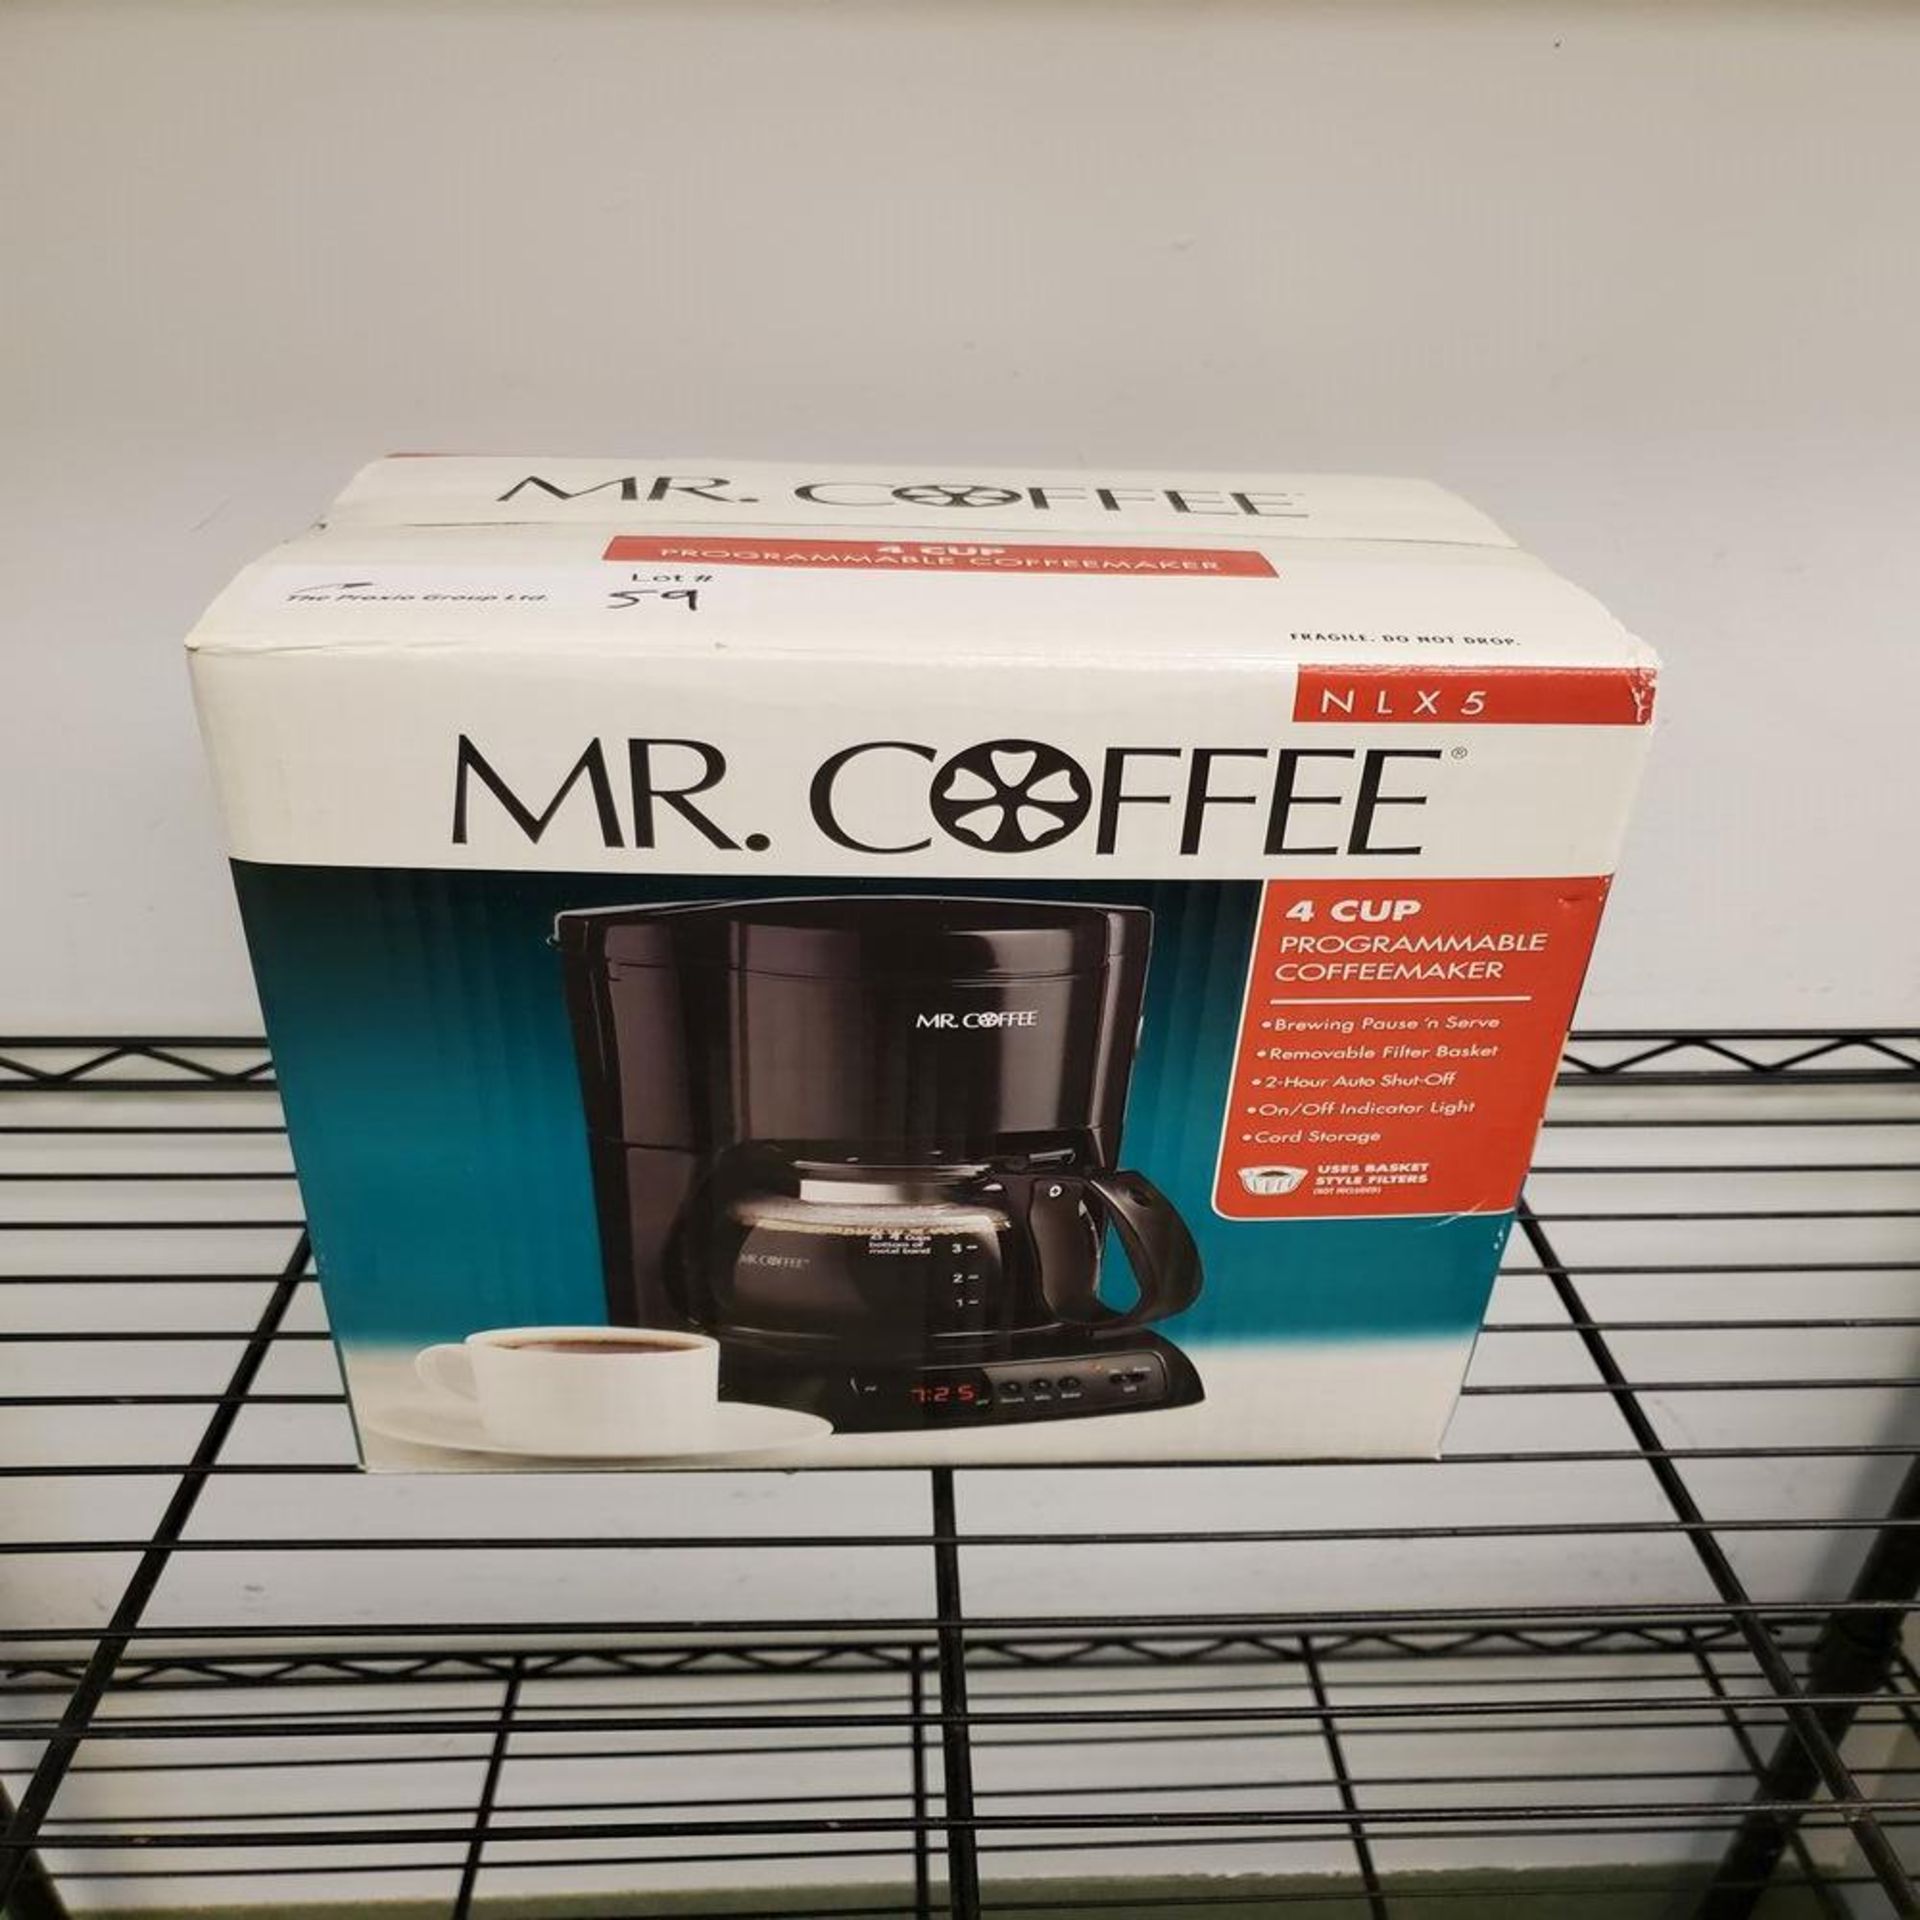 Mr. Coffee NLX5 4-Cup Coffeemaker - Image 2 of 2